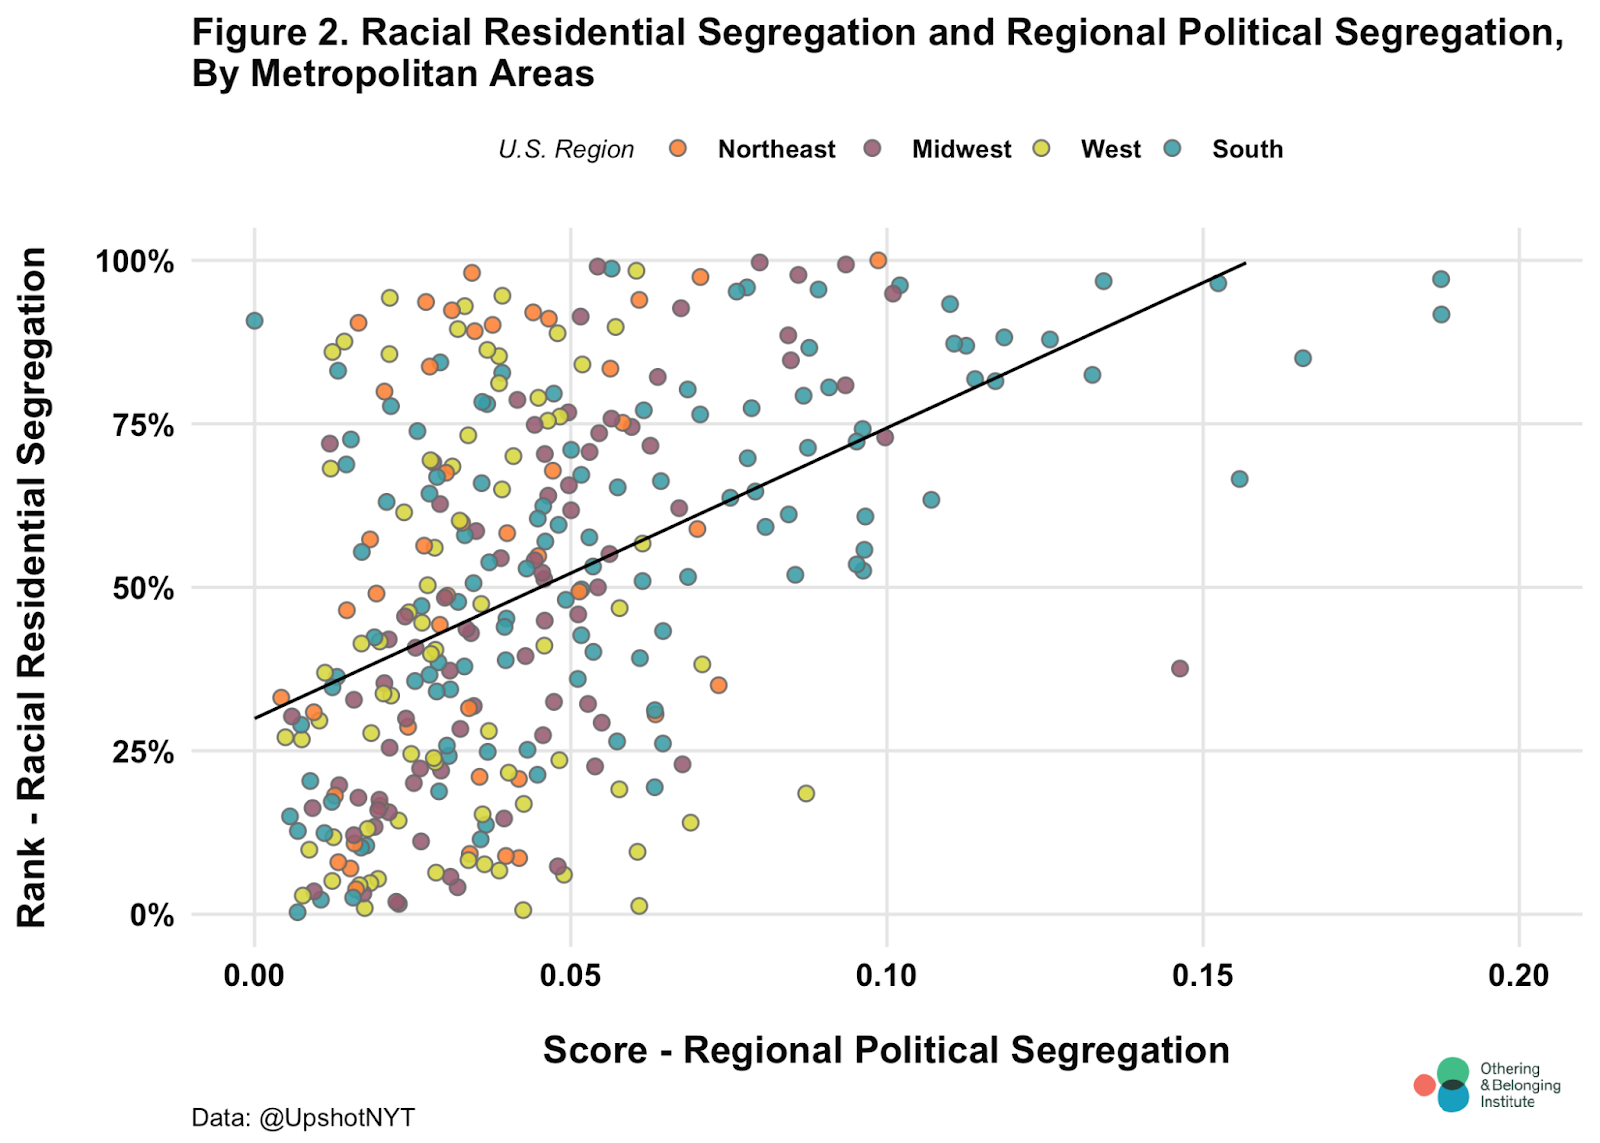 A scatter plot illustrating the relationship between residential segregation and political polarization: the greater the level of segregation, the greater the level of polarization. 